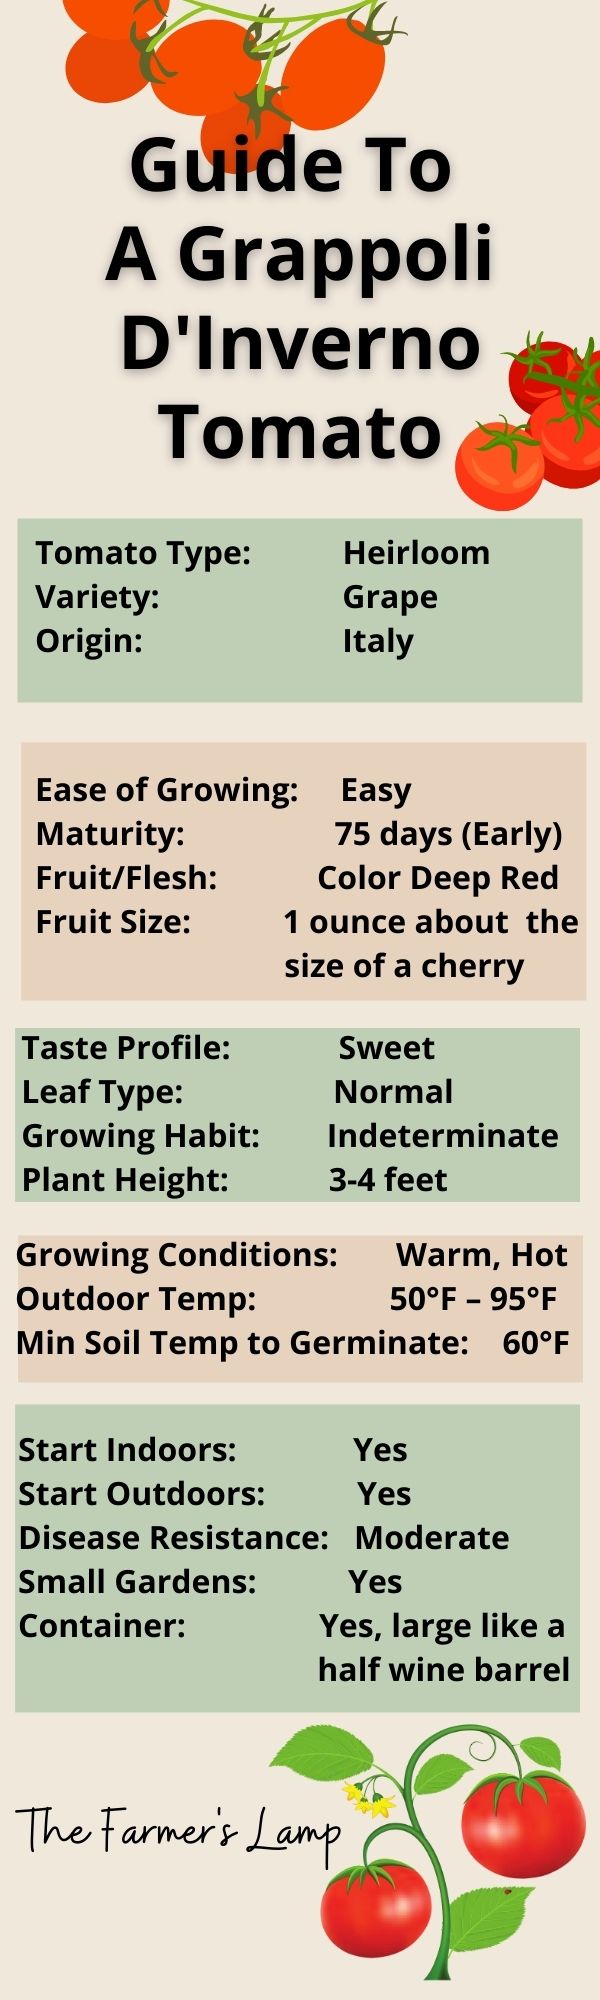 Infographic for details of A Grappoli D'Inverno tomato